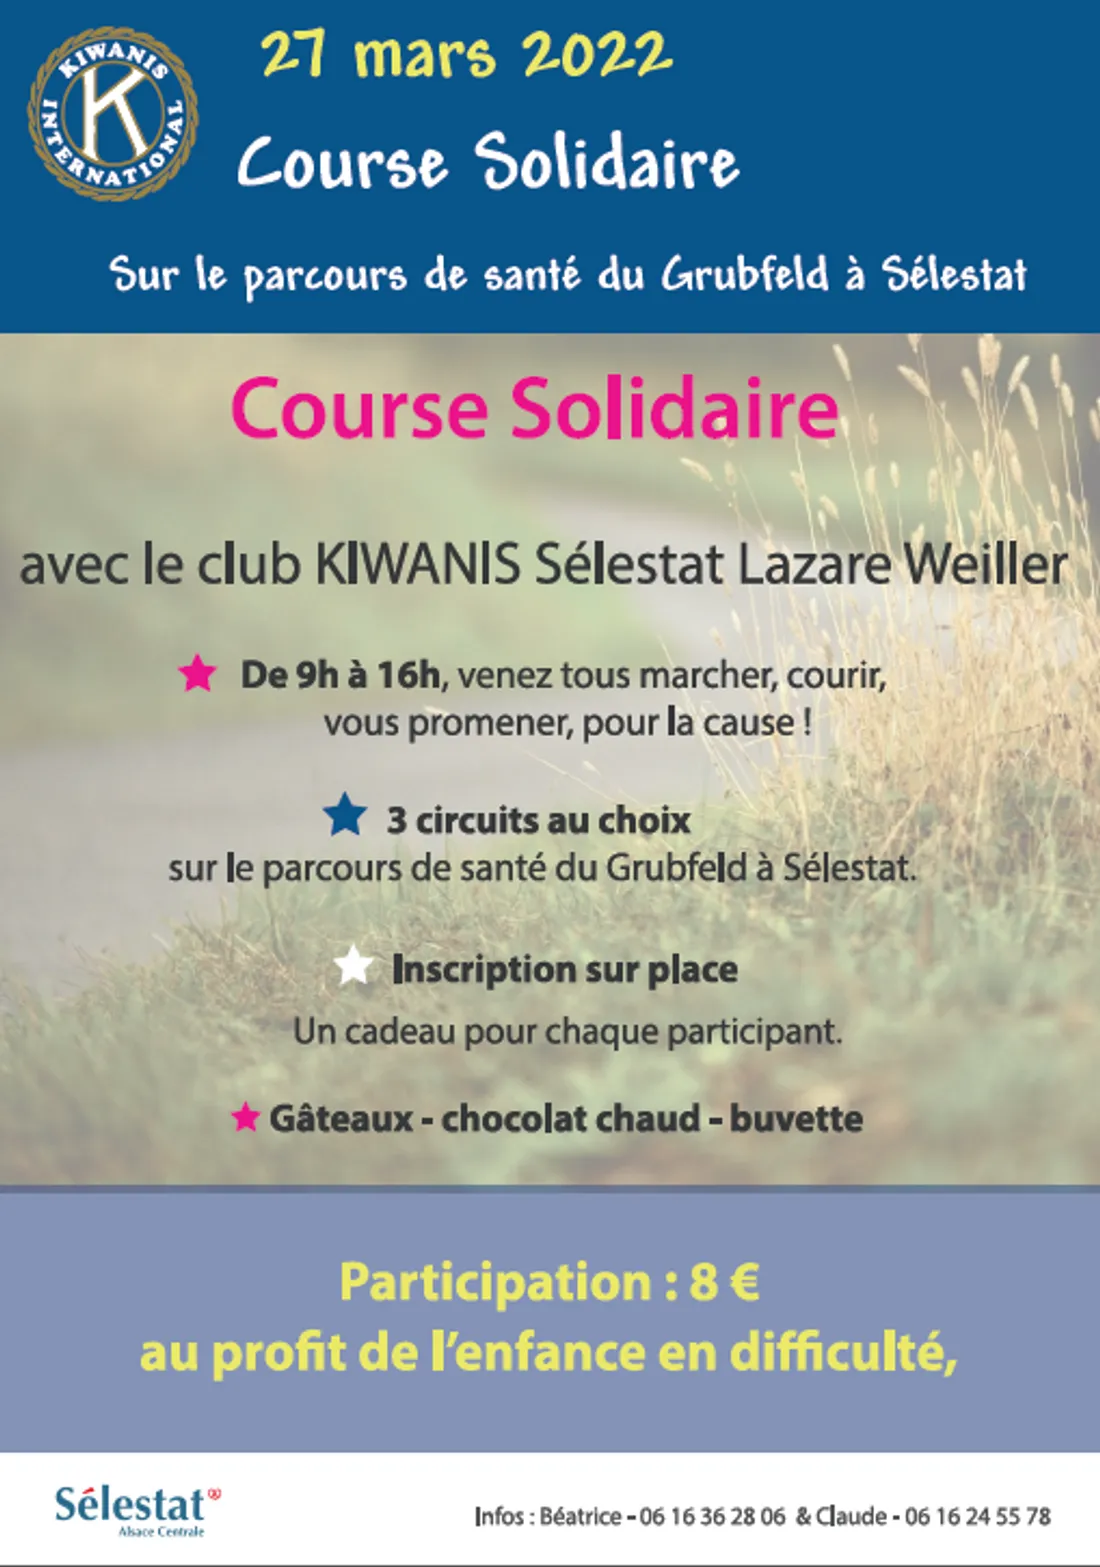 course solidaire kiwanis